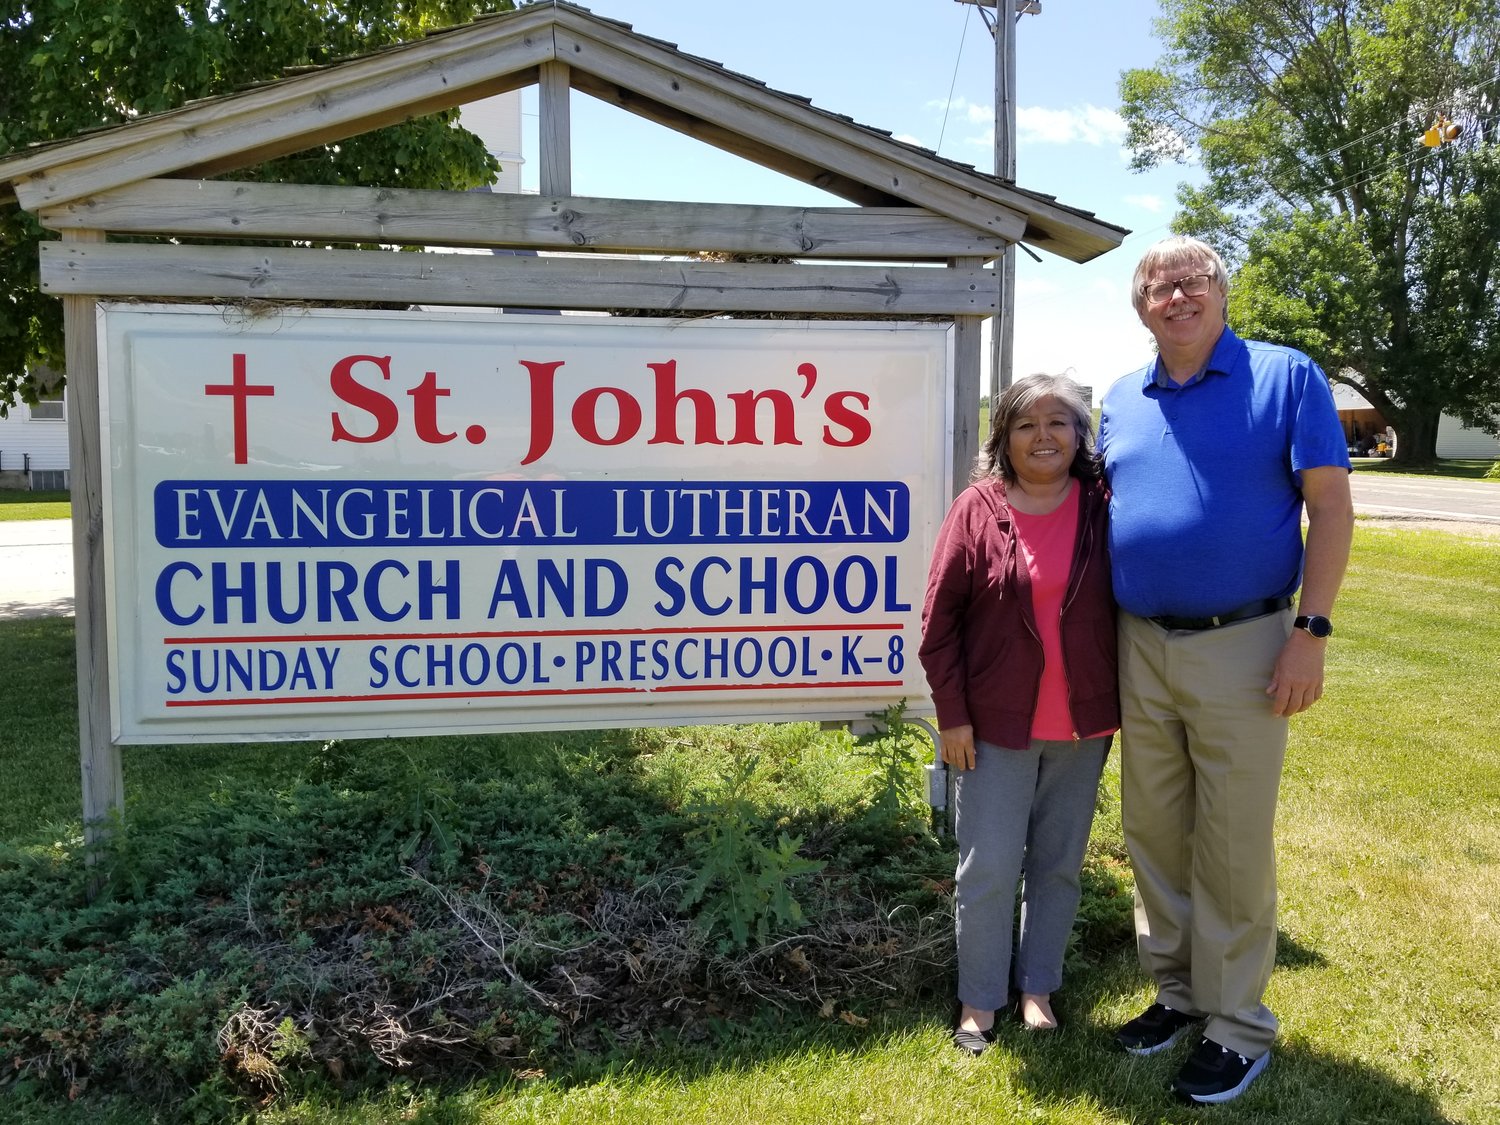 Al and Sandy Karnopp served St. John's School for the past 5 years.  They are now residing in Albuquerque, New Mexico where Al is the principal at Shepard Lutheran.